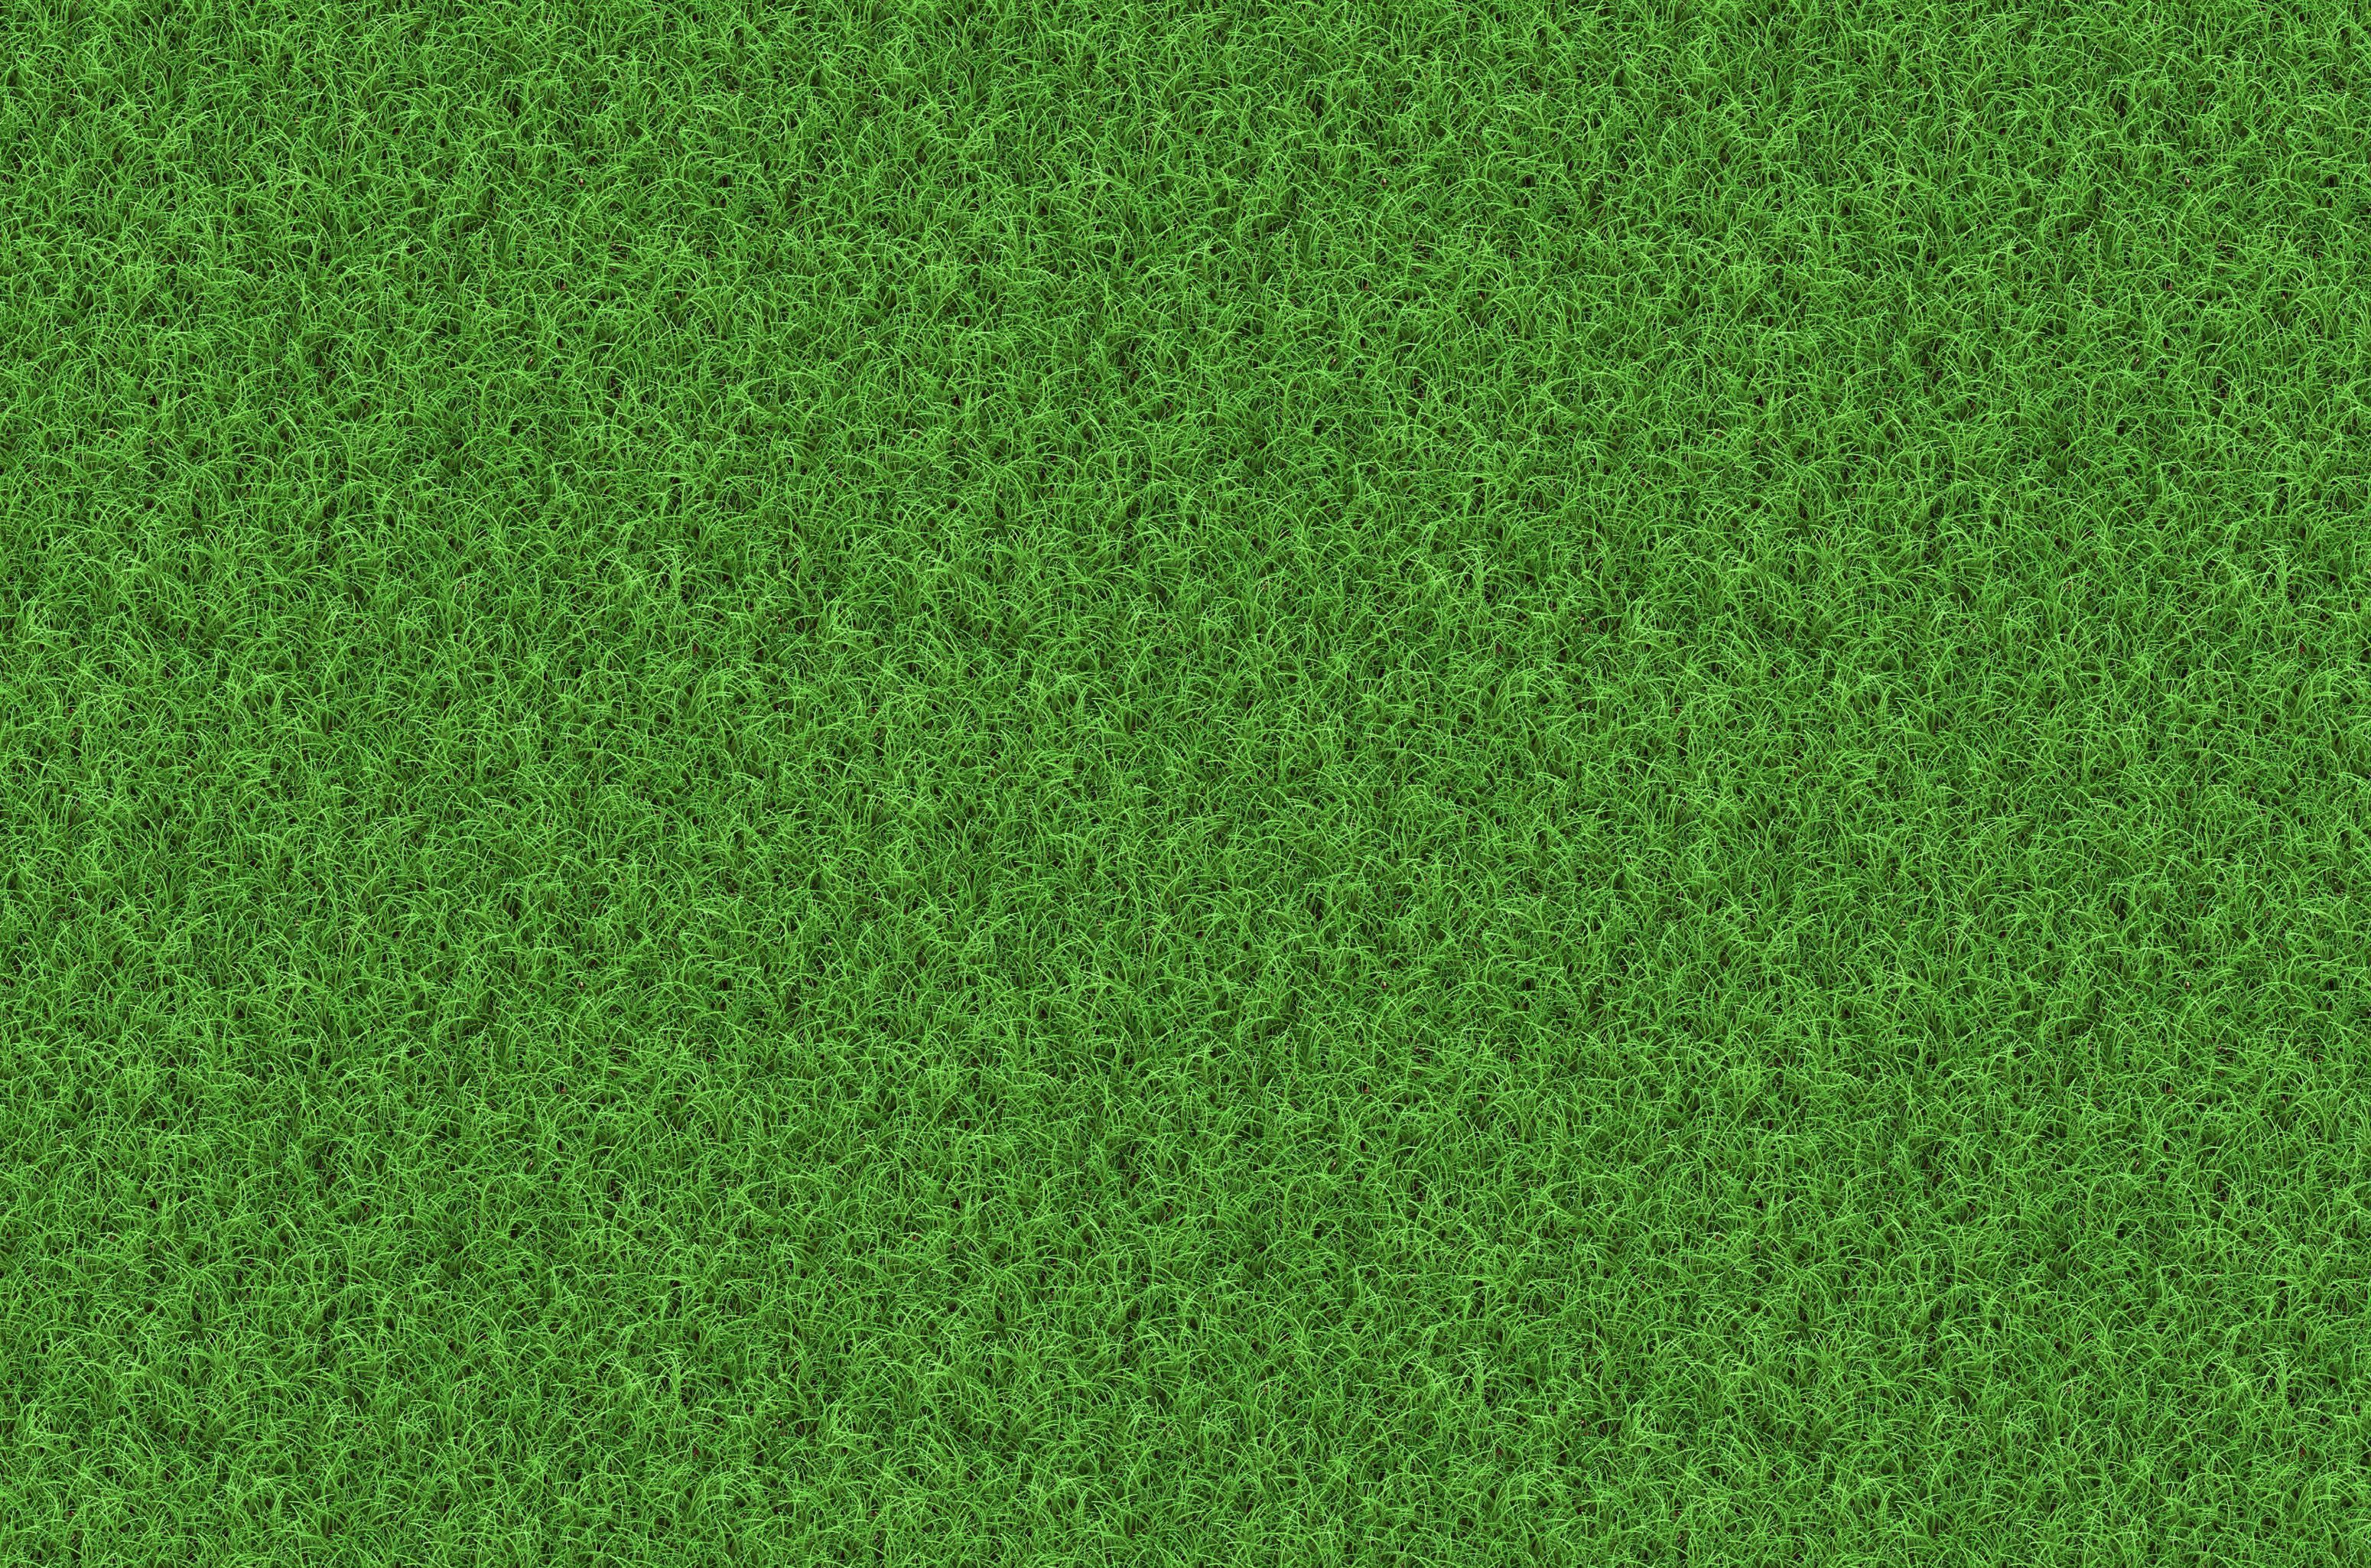 generated grass texture or green lawn background | www ...